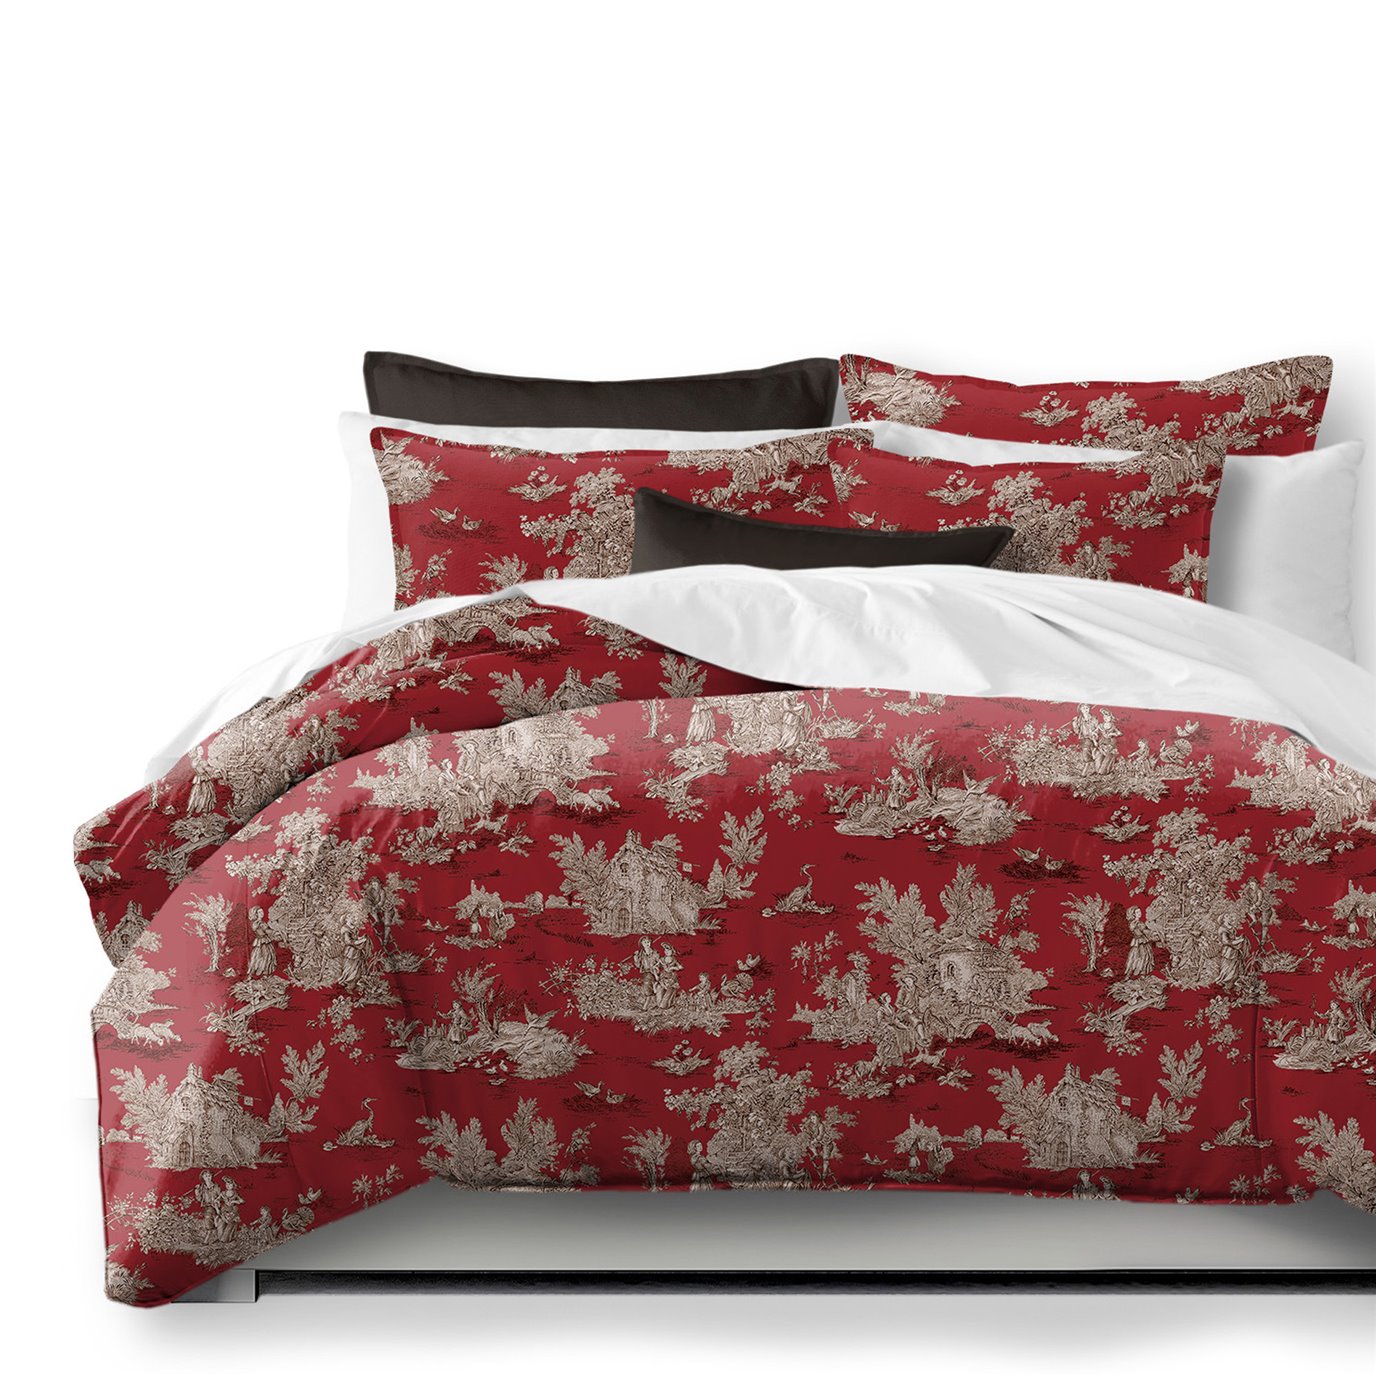 Chateau Red/Black Duvet Cover and Pillow Sham(s) Set - Size Super King